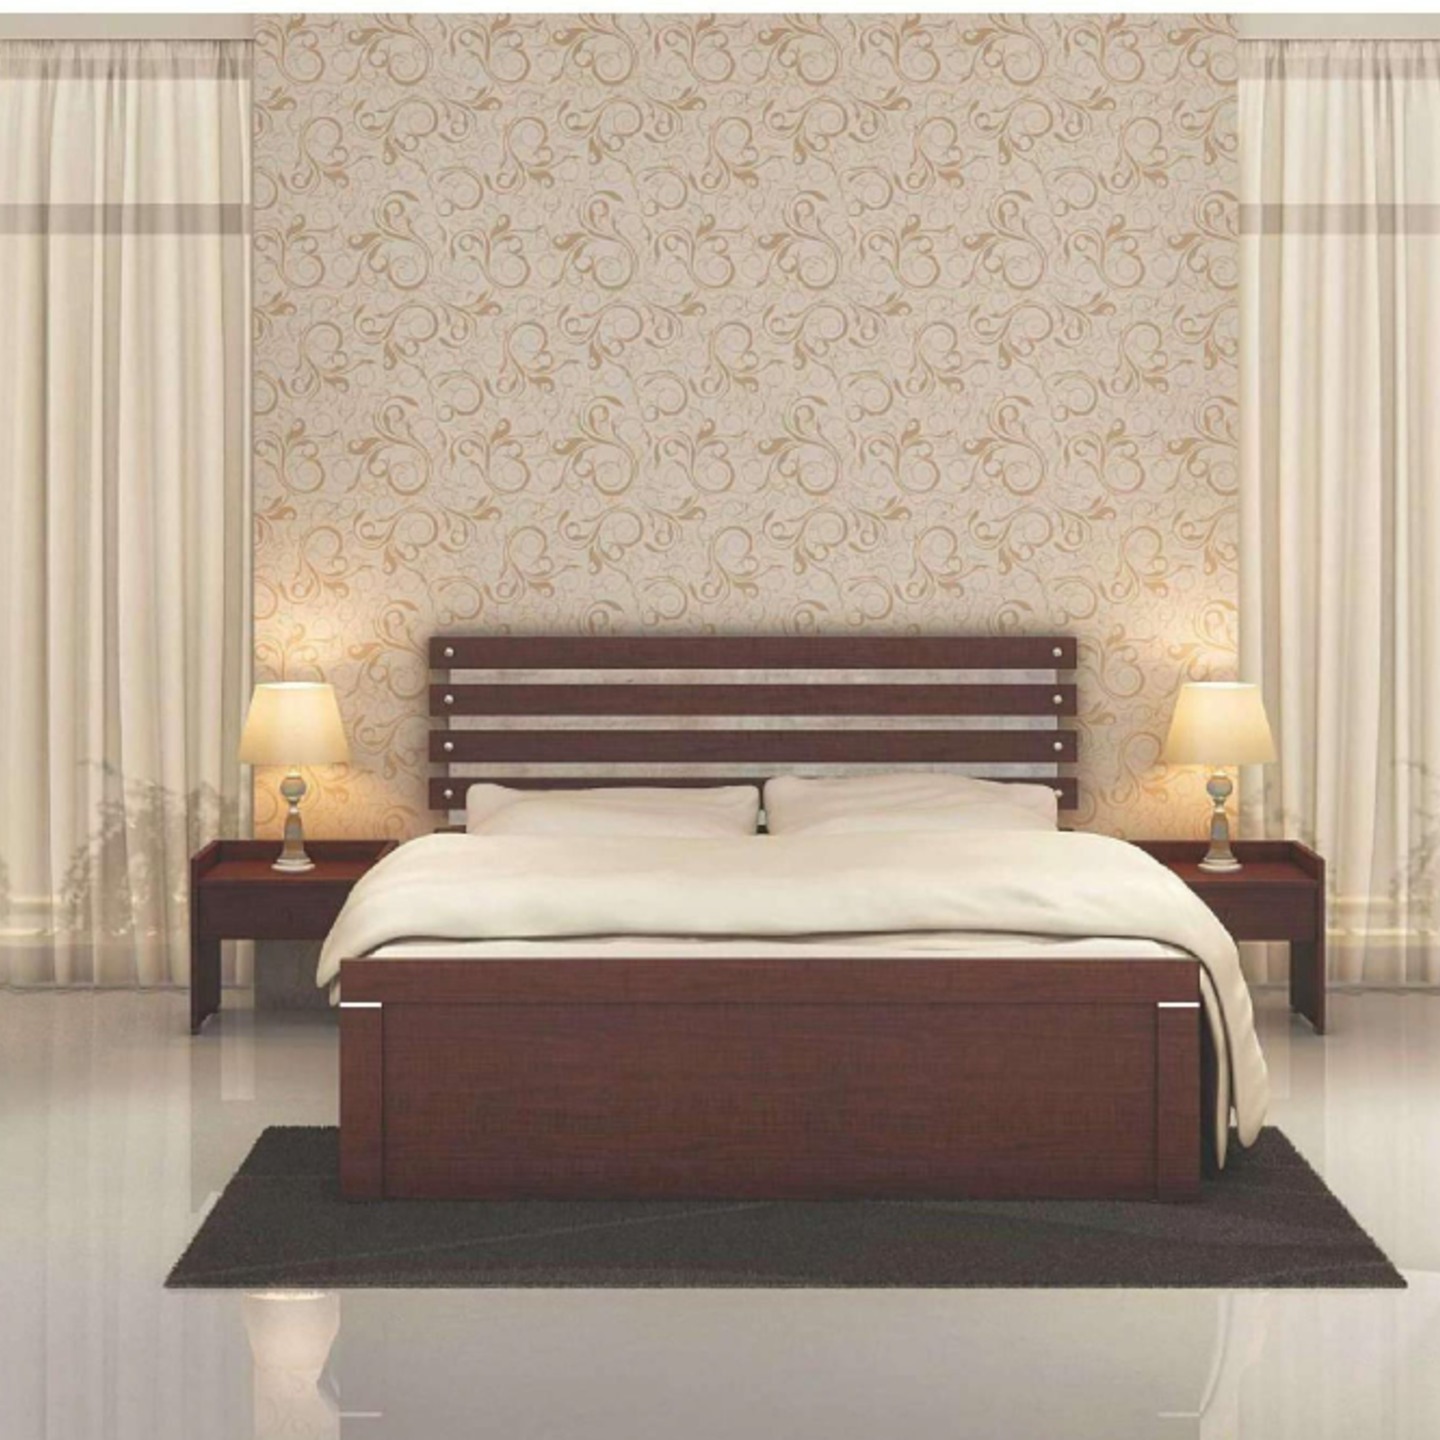 RD Queen Size Bed Hydraulic 78"x60" Elina Stripes Brown Colour